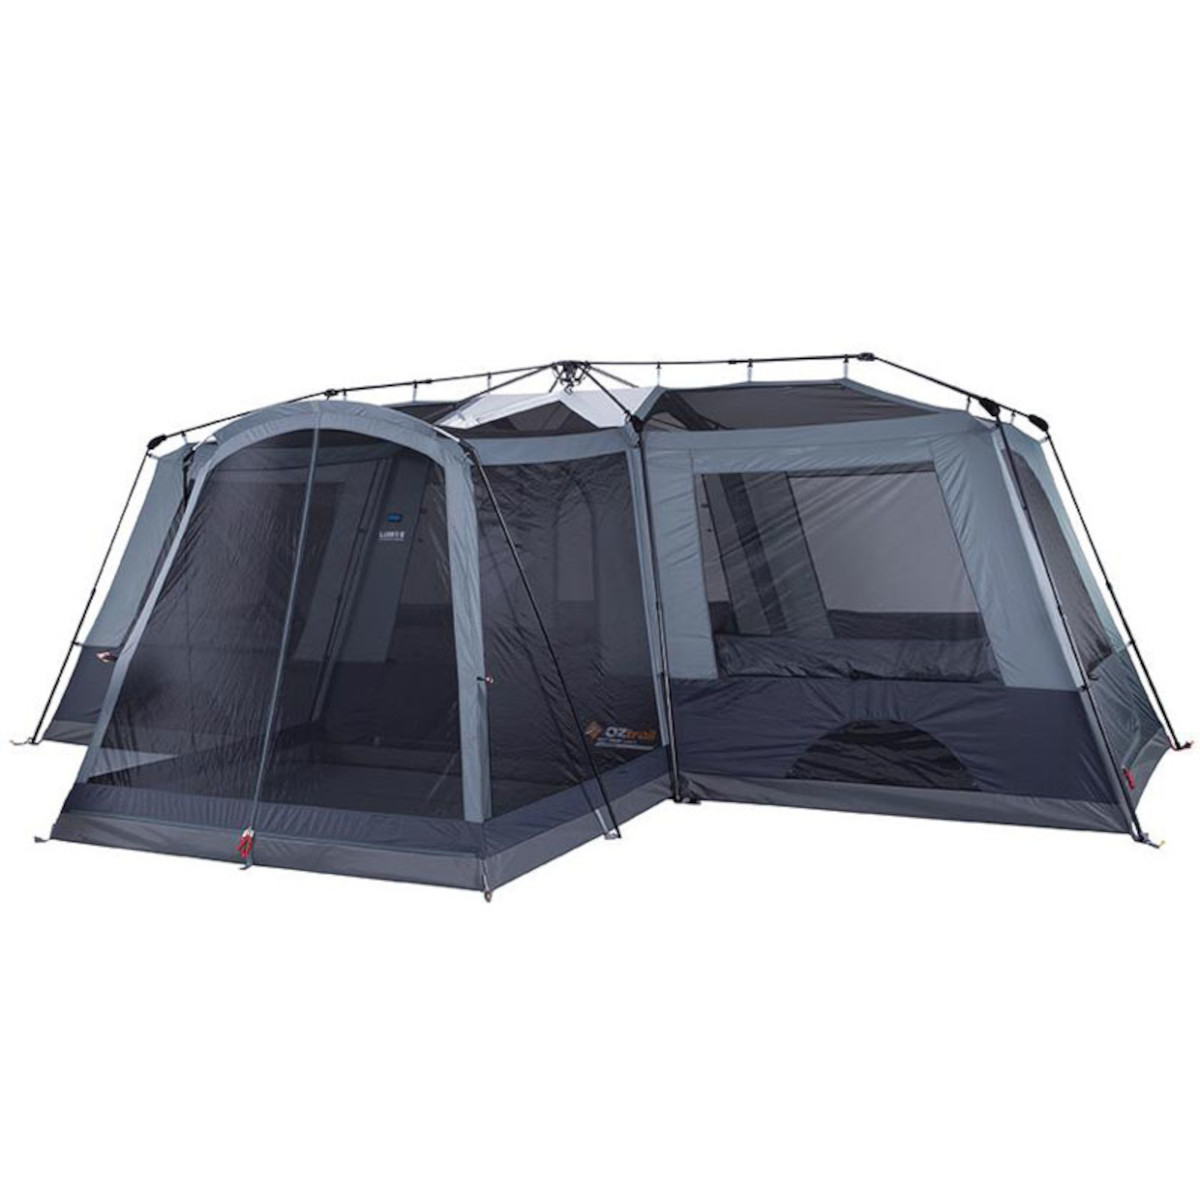 Oztrail Fast Frame Lumos 12P Tent-camping tent